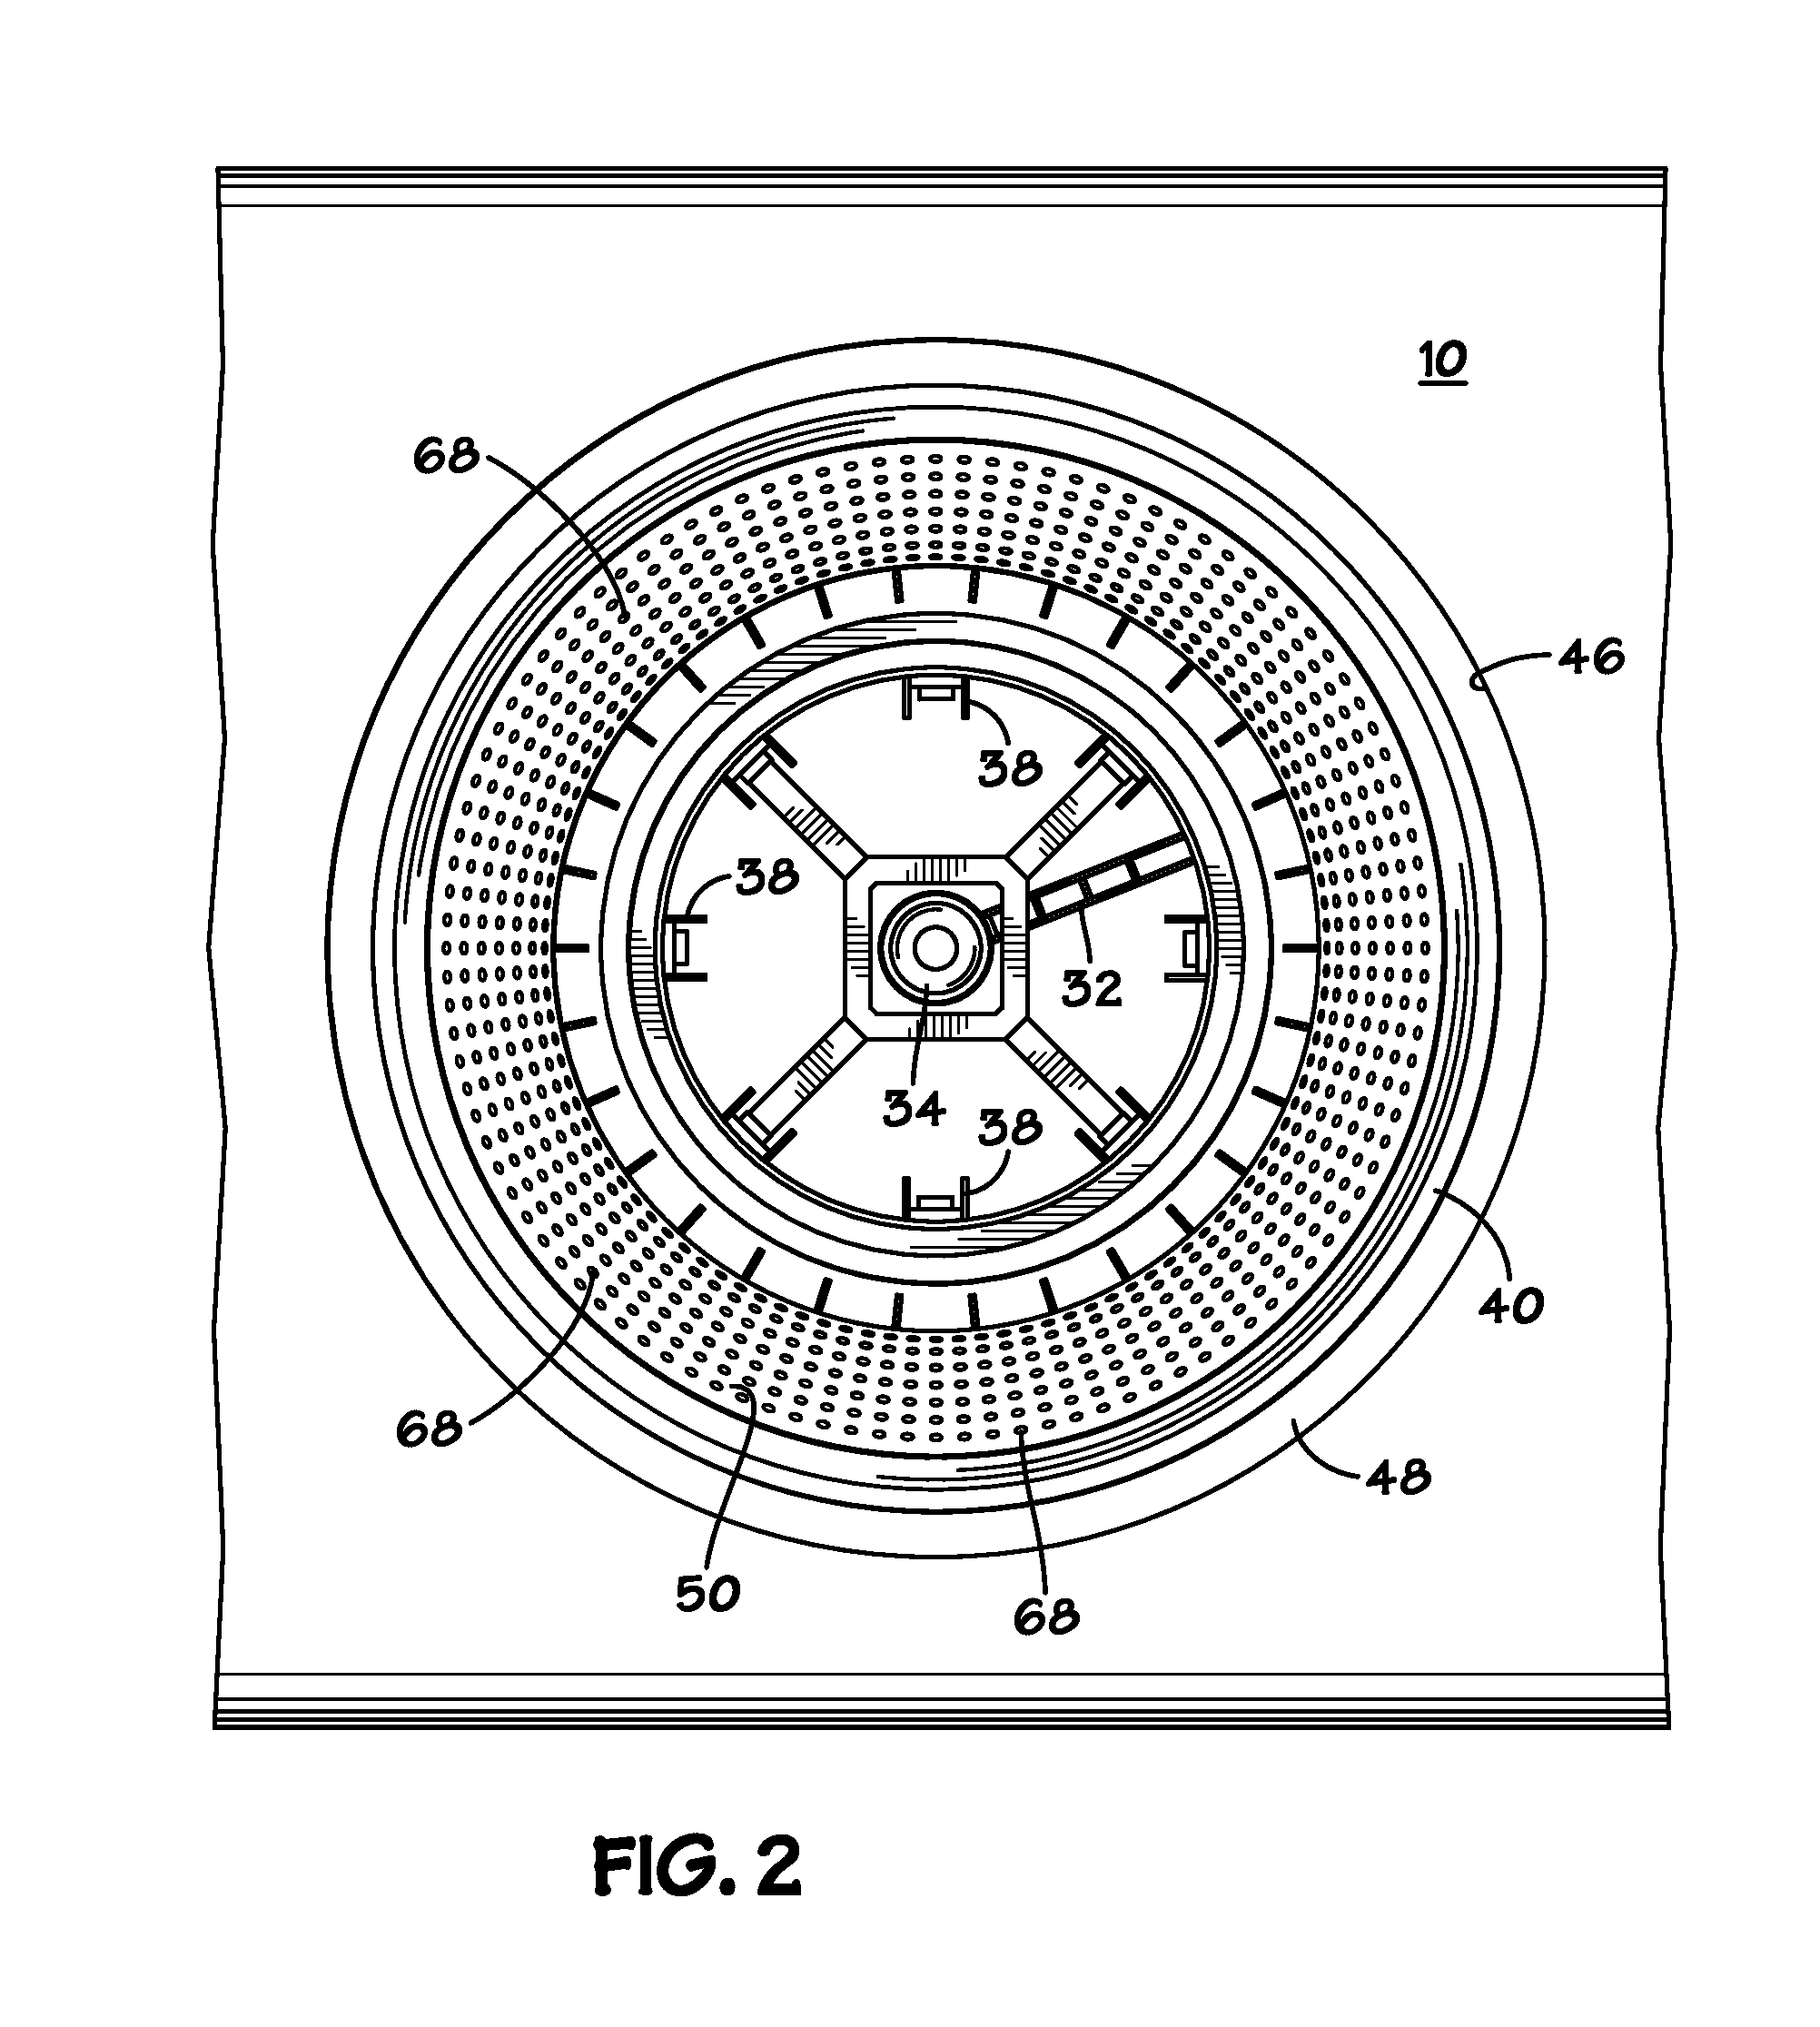 Buoyant turret mooring with porous receptor cage